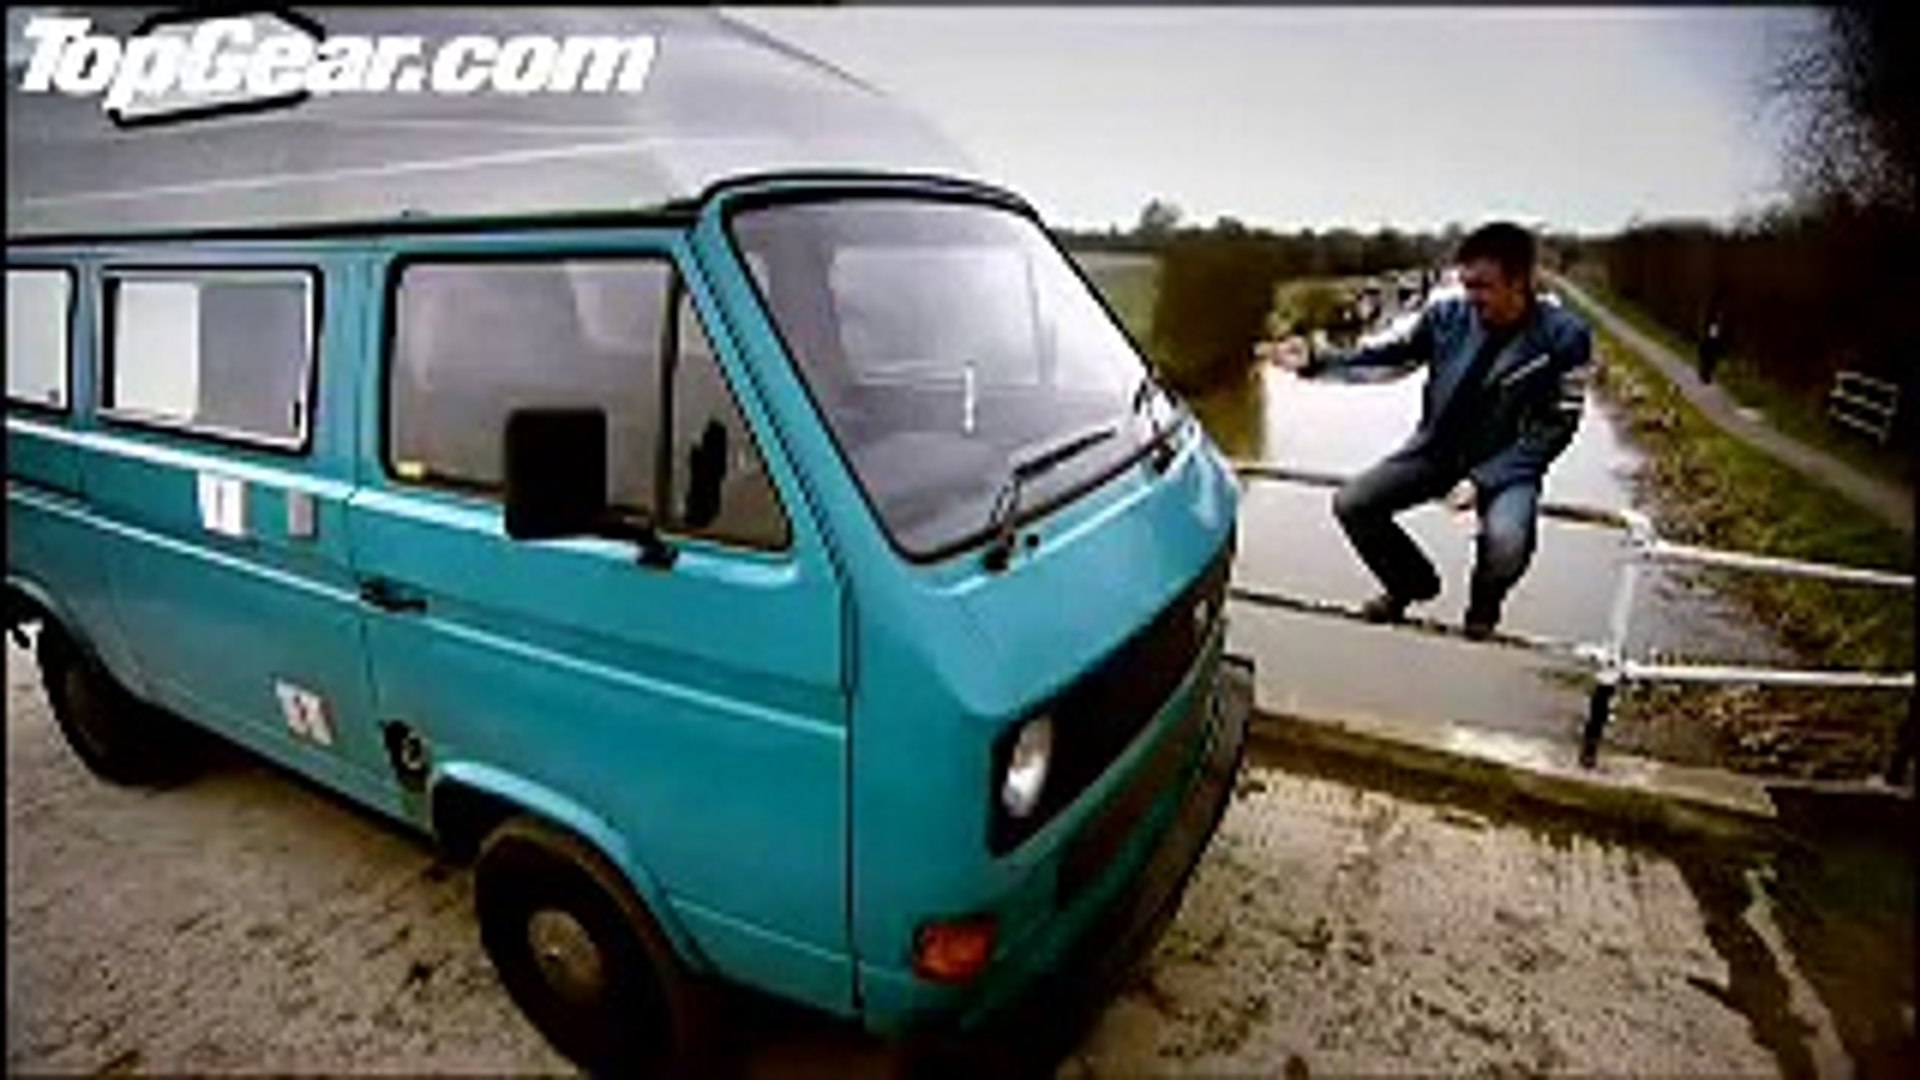 Car - Boat Challenge - Top Gear series 8 - BBC - video Dailymotion